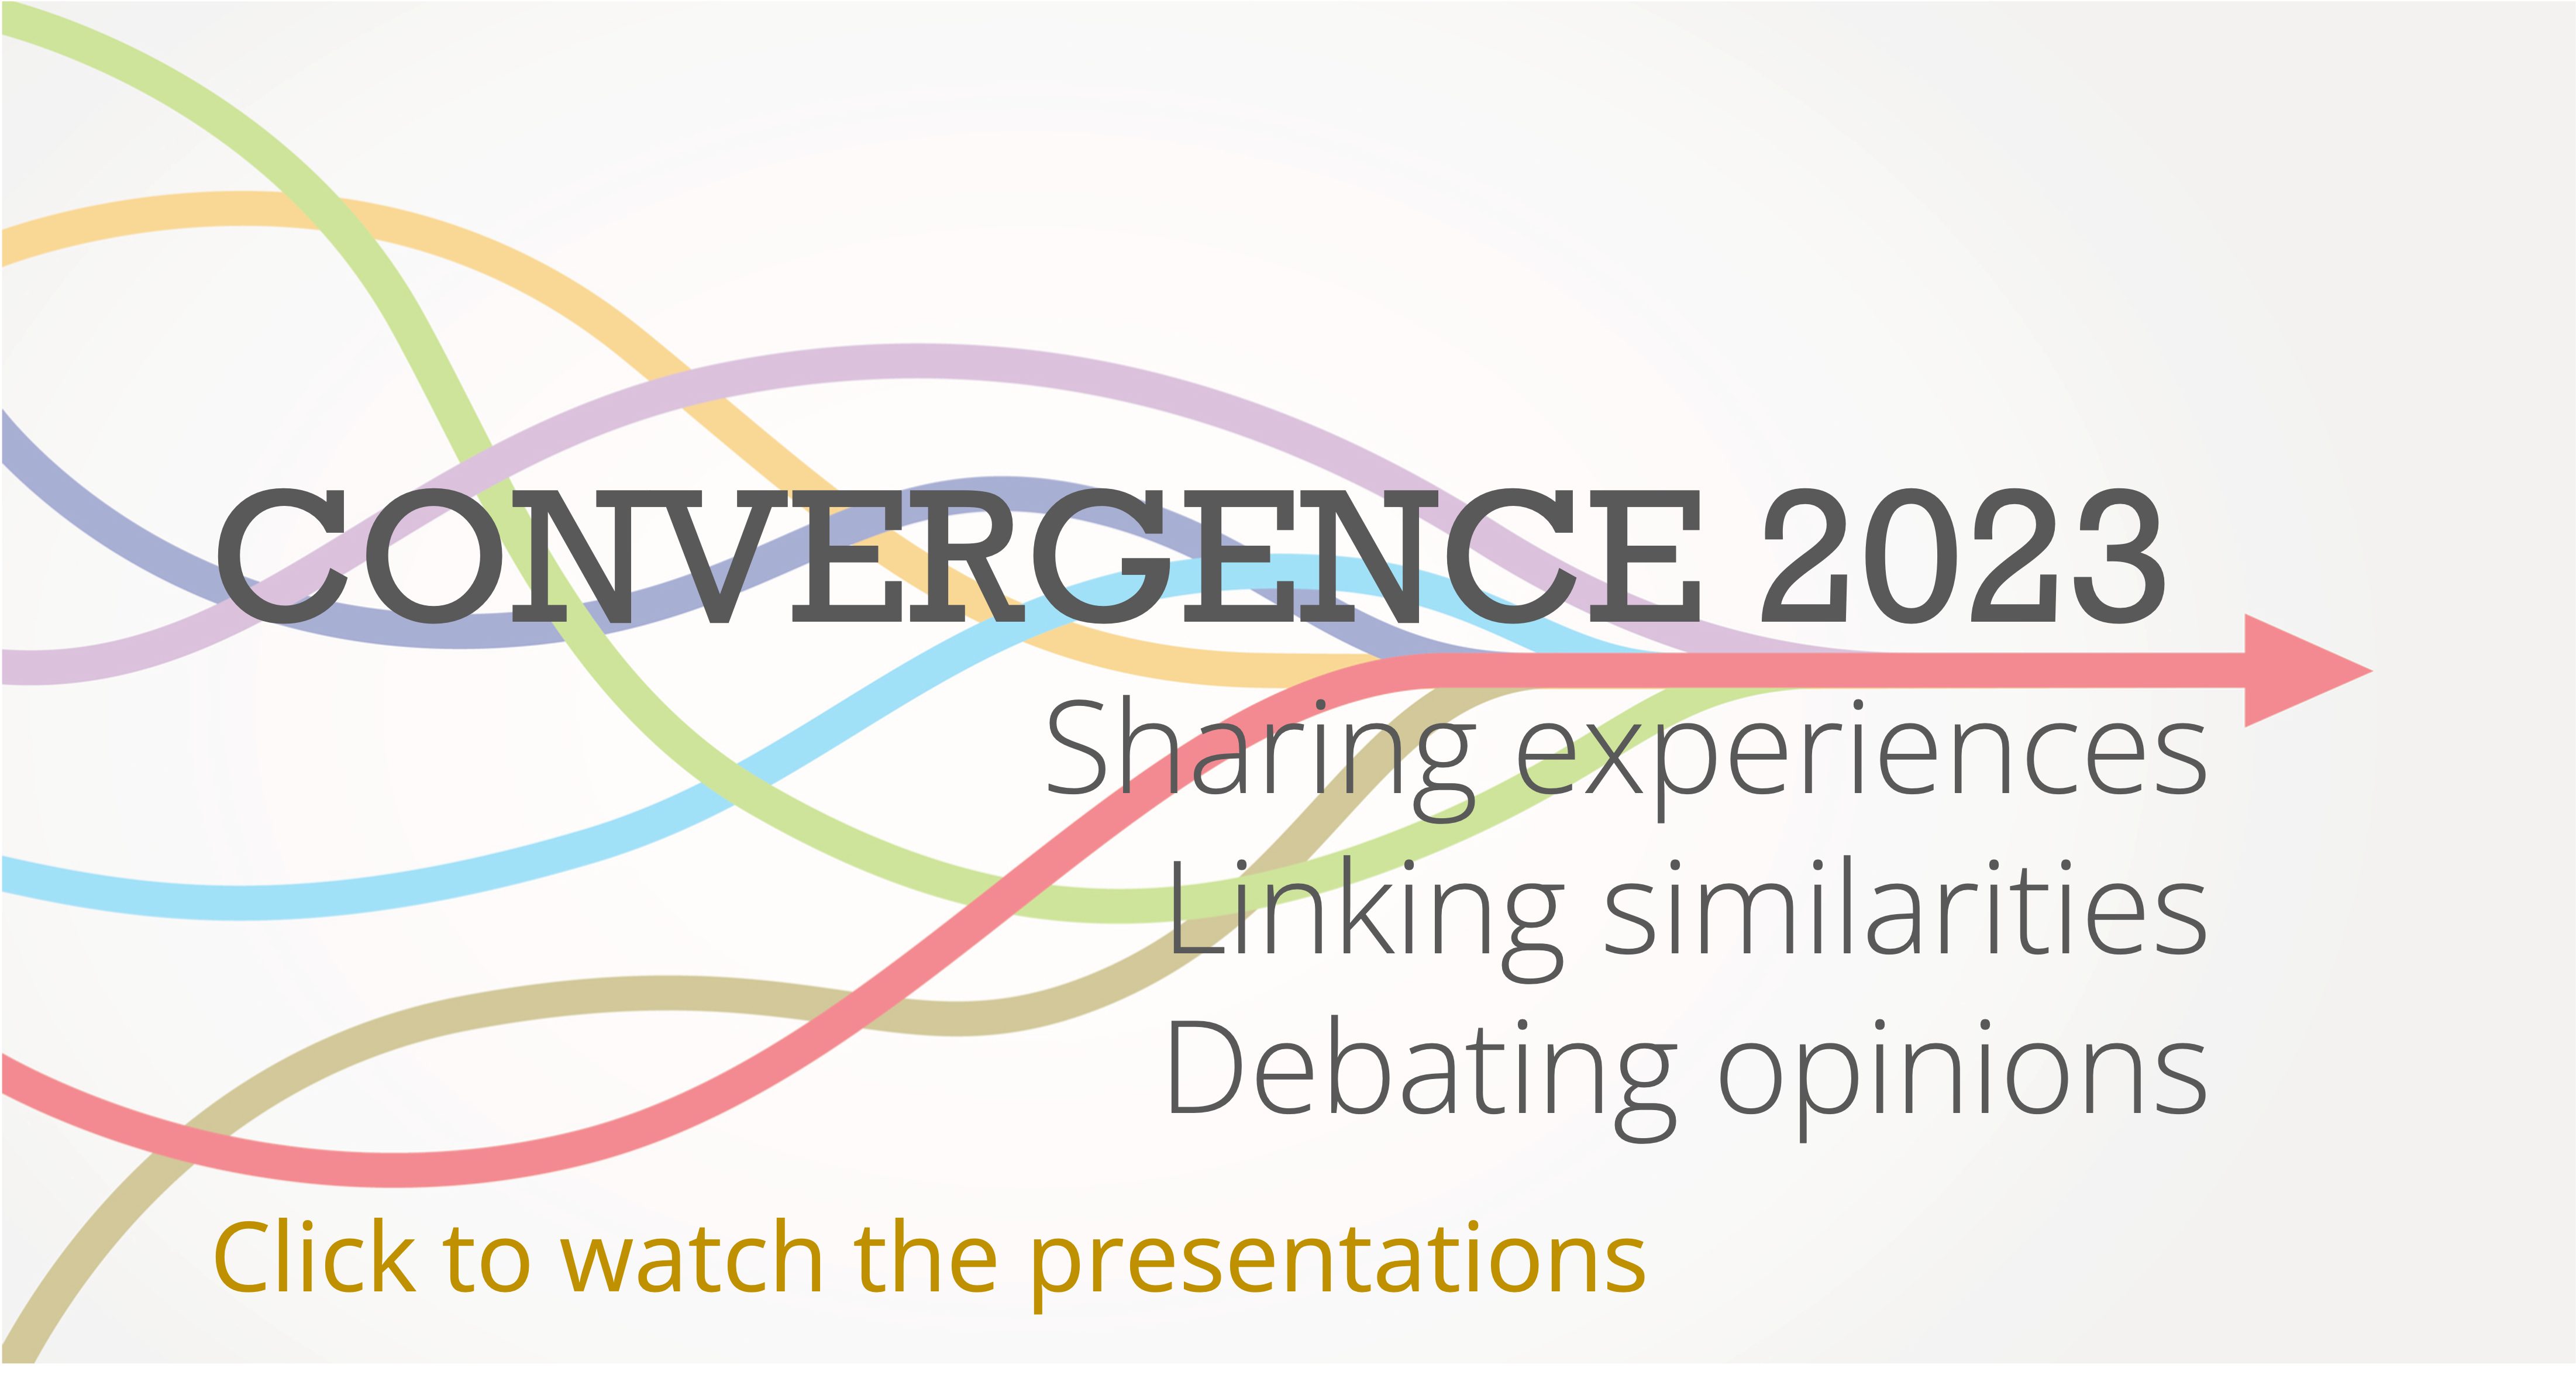 Link to GATE Convergence 2023 videos